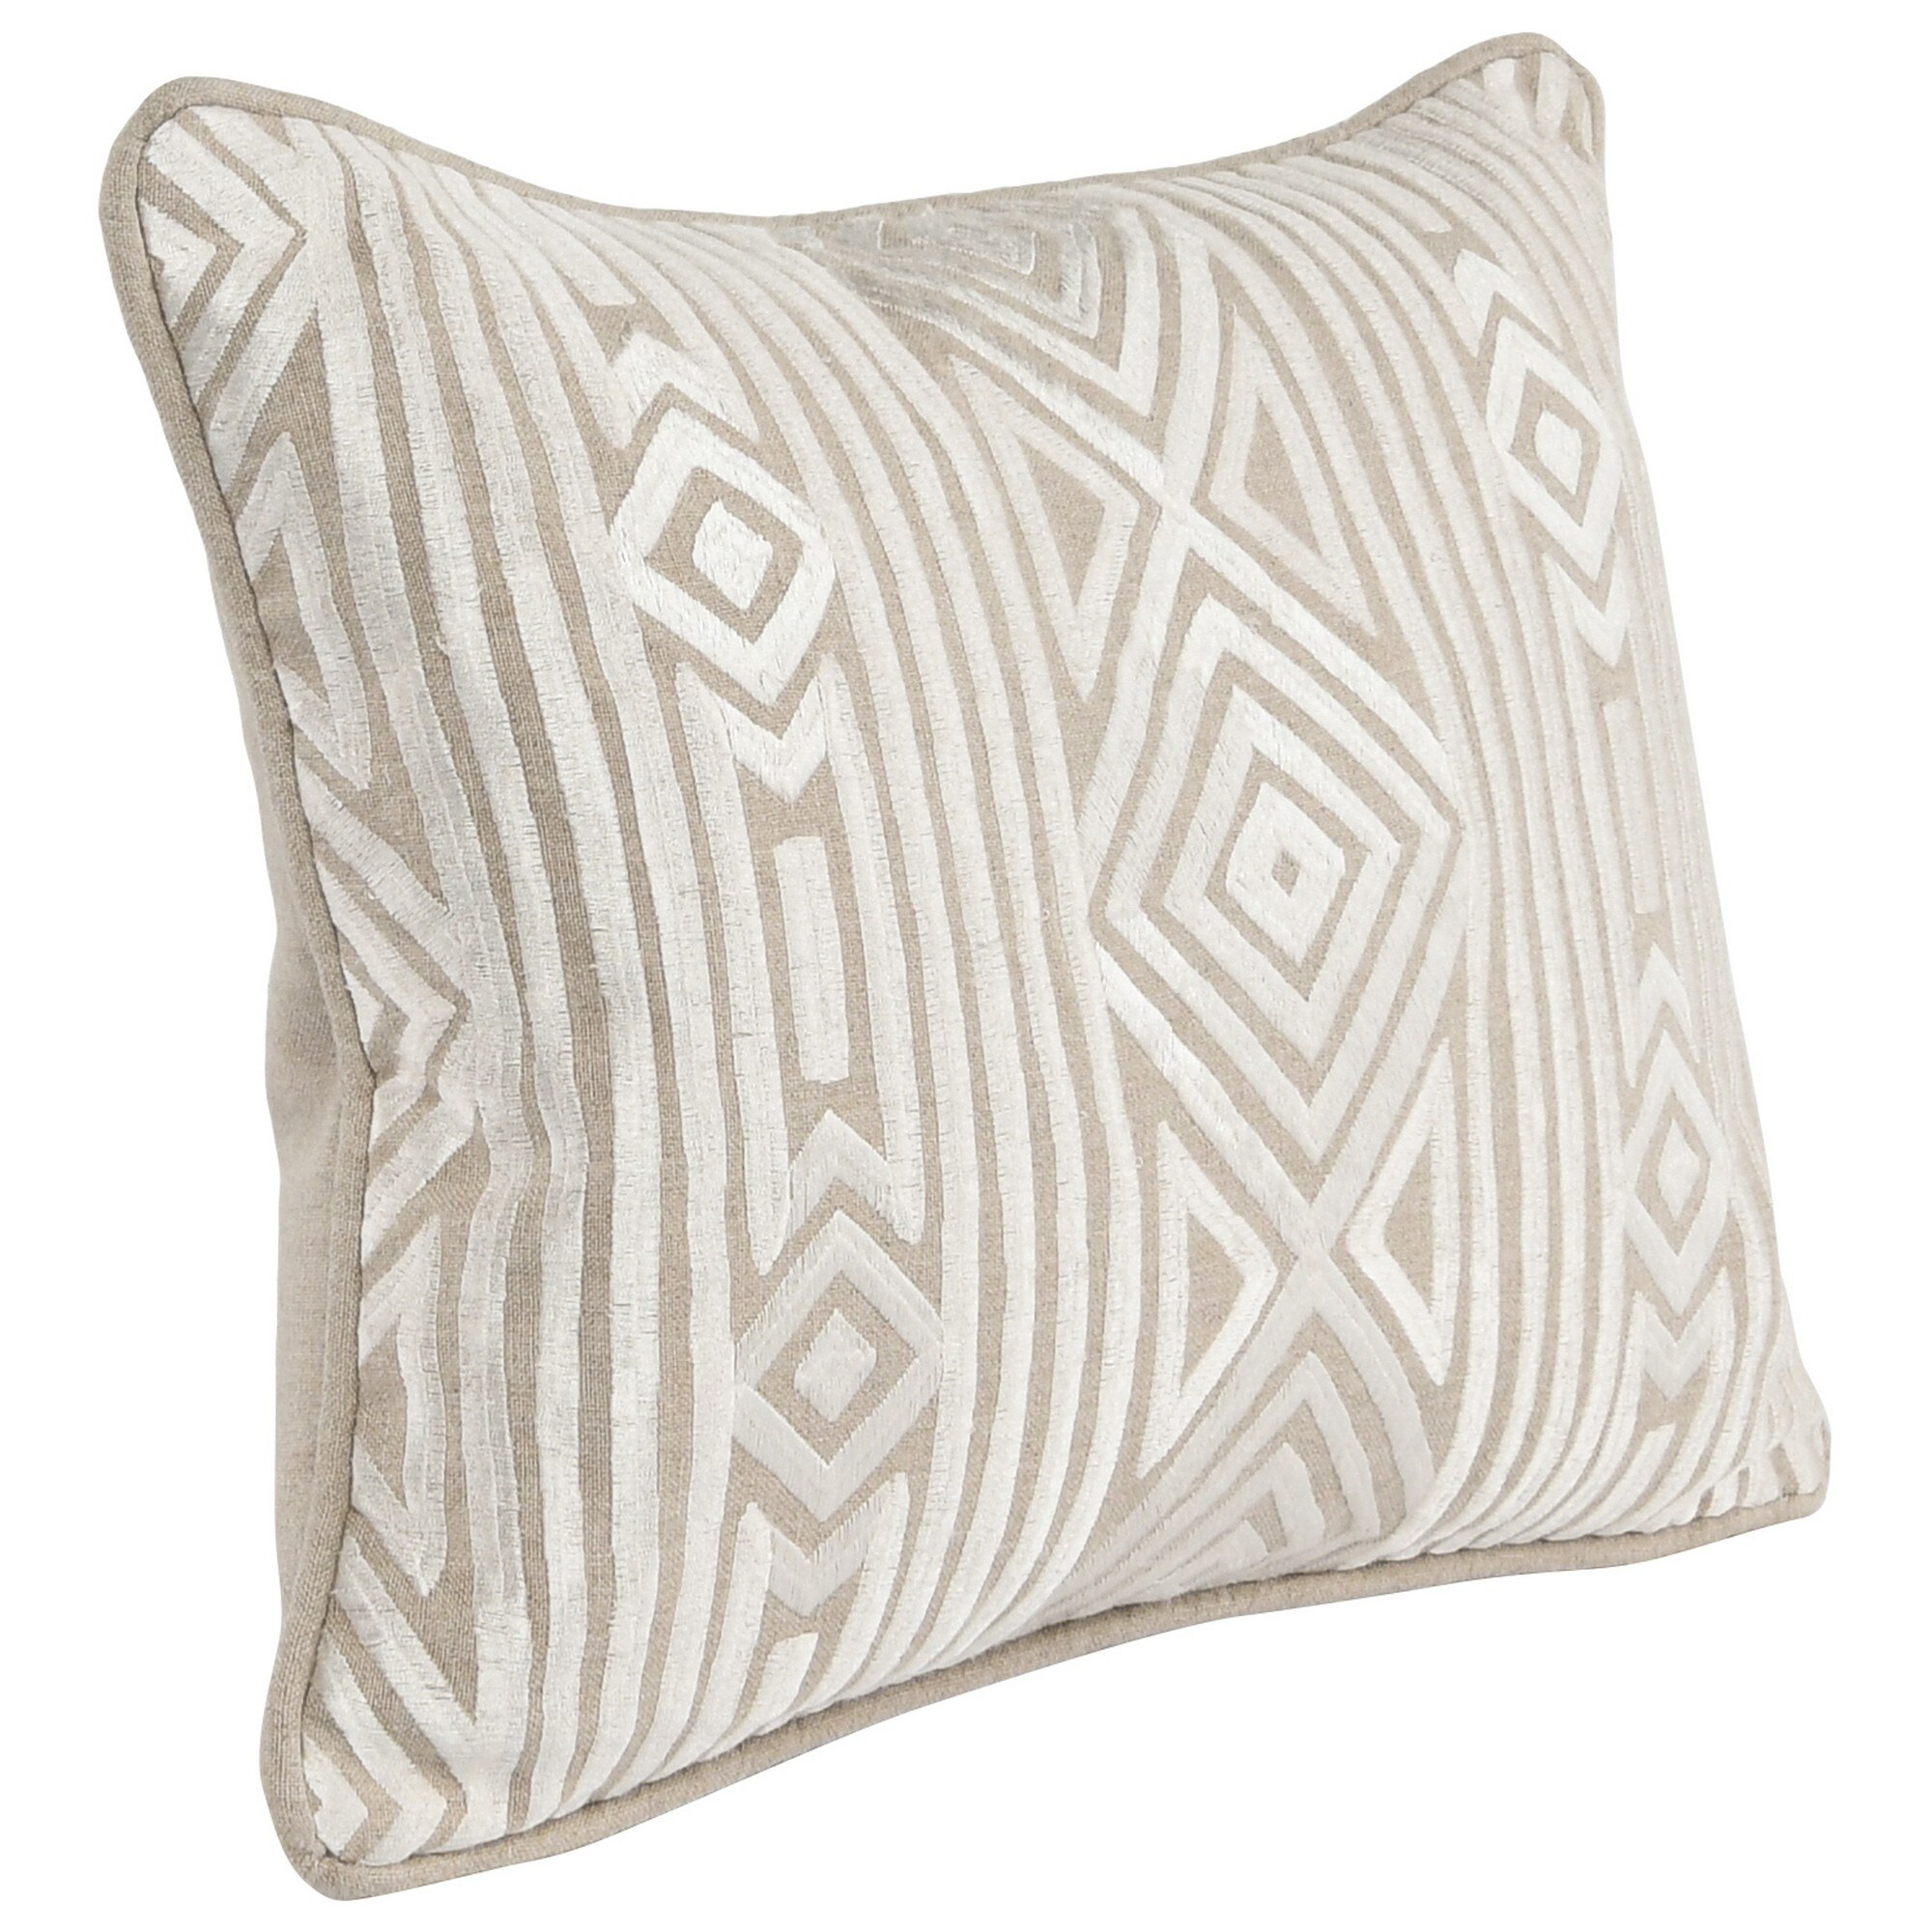 https://ak1.ostkcdn.com/images/products/is/images/direct/9c4fa4679cb82185383b08a2dd15765d8fe1e1d4/12-x-16-Square-Linen-Accent-Throw-Pillow%2C-Tribal-Accent%2C-Piped-Edges%2C-Ivory.jpg